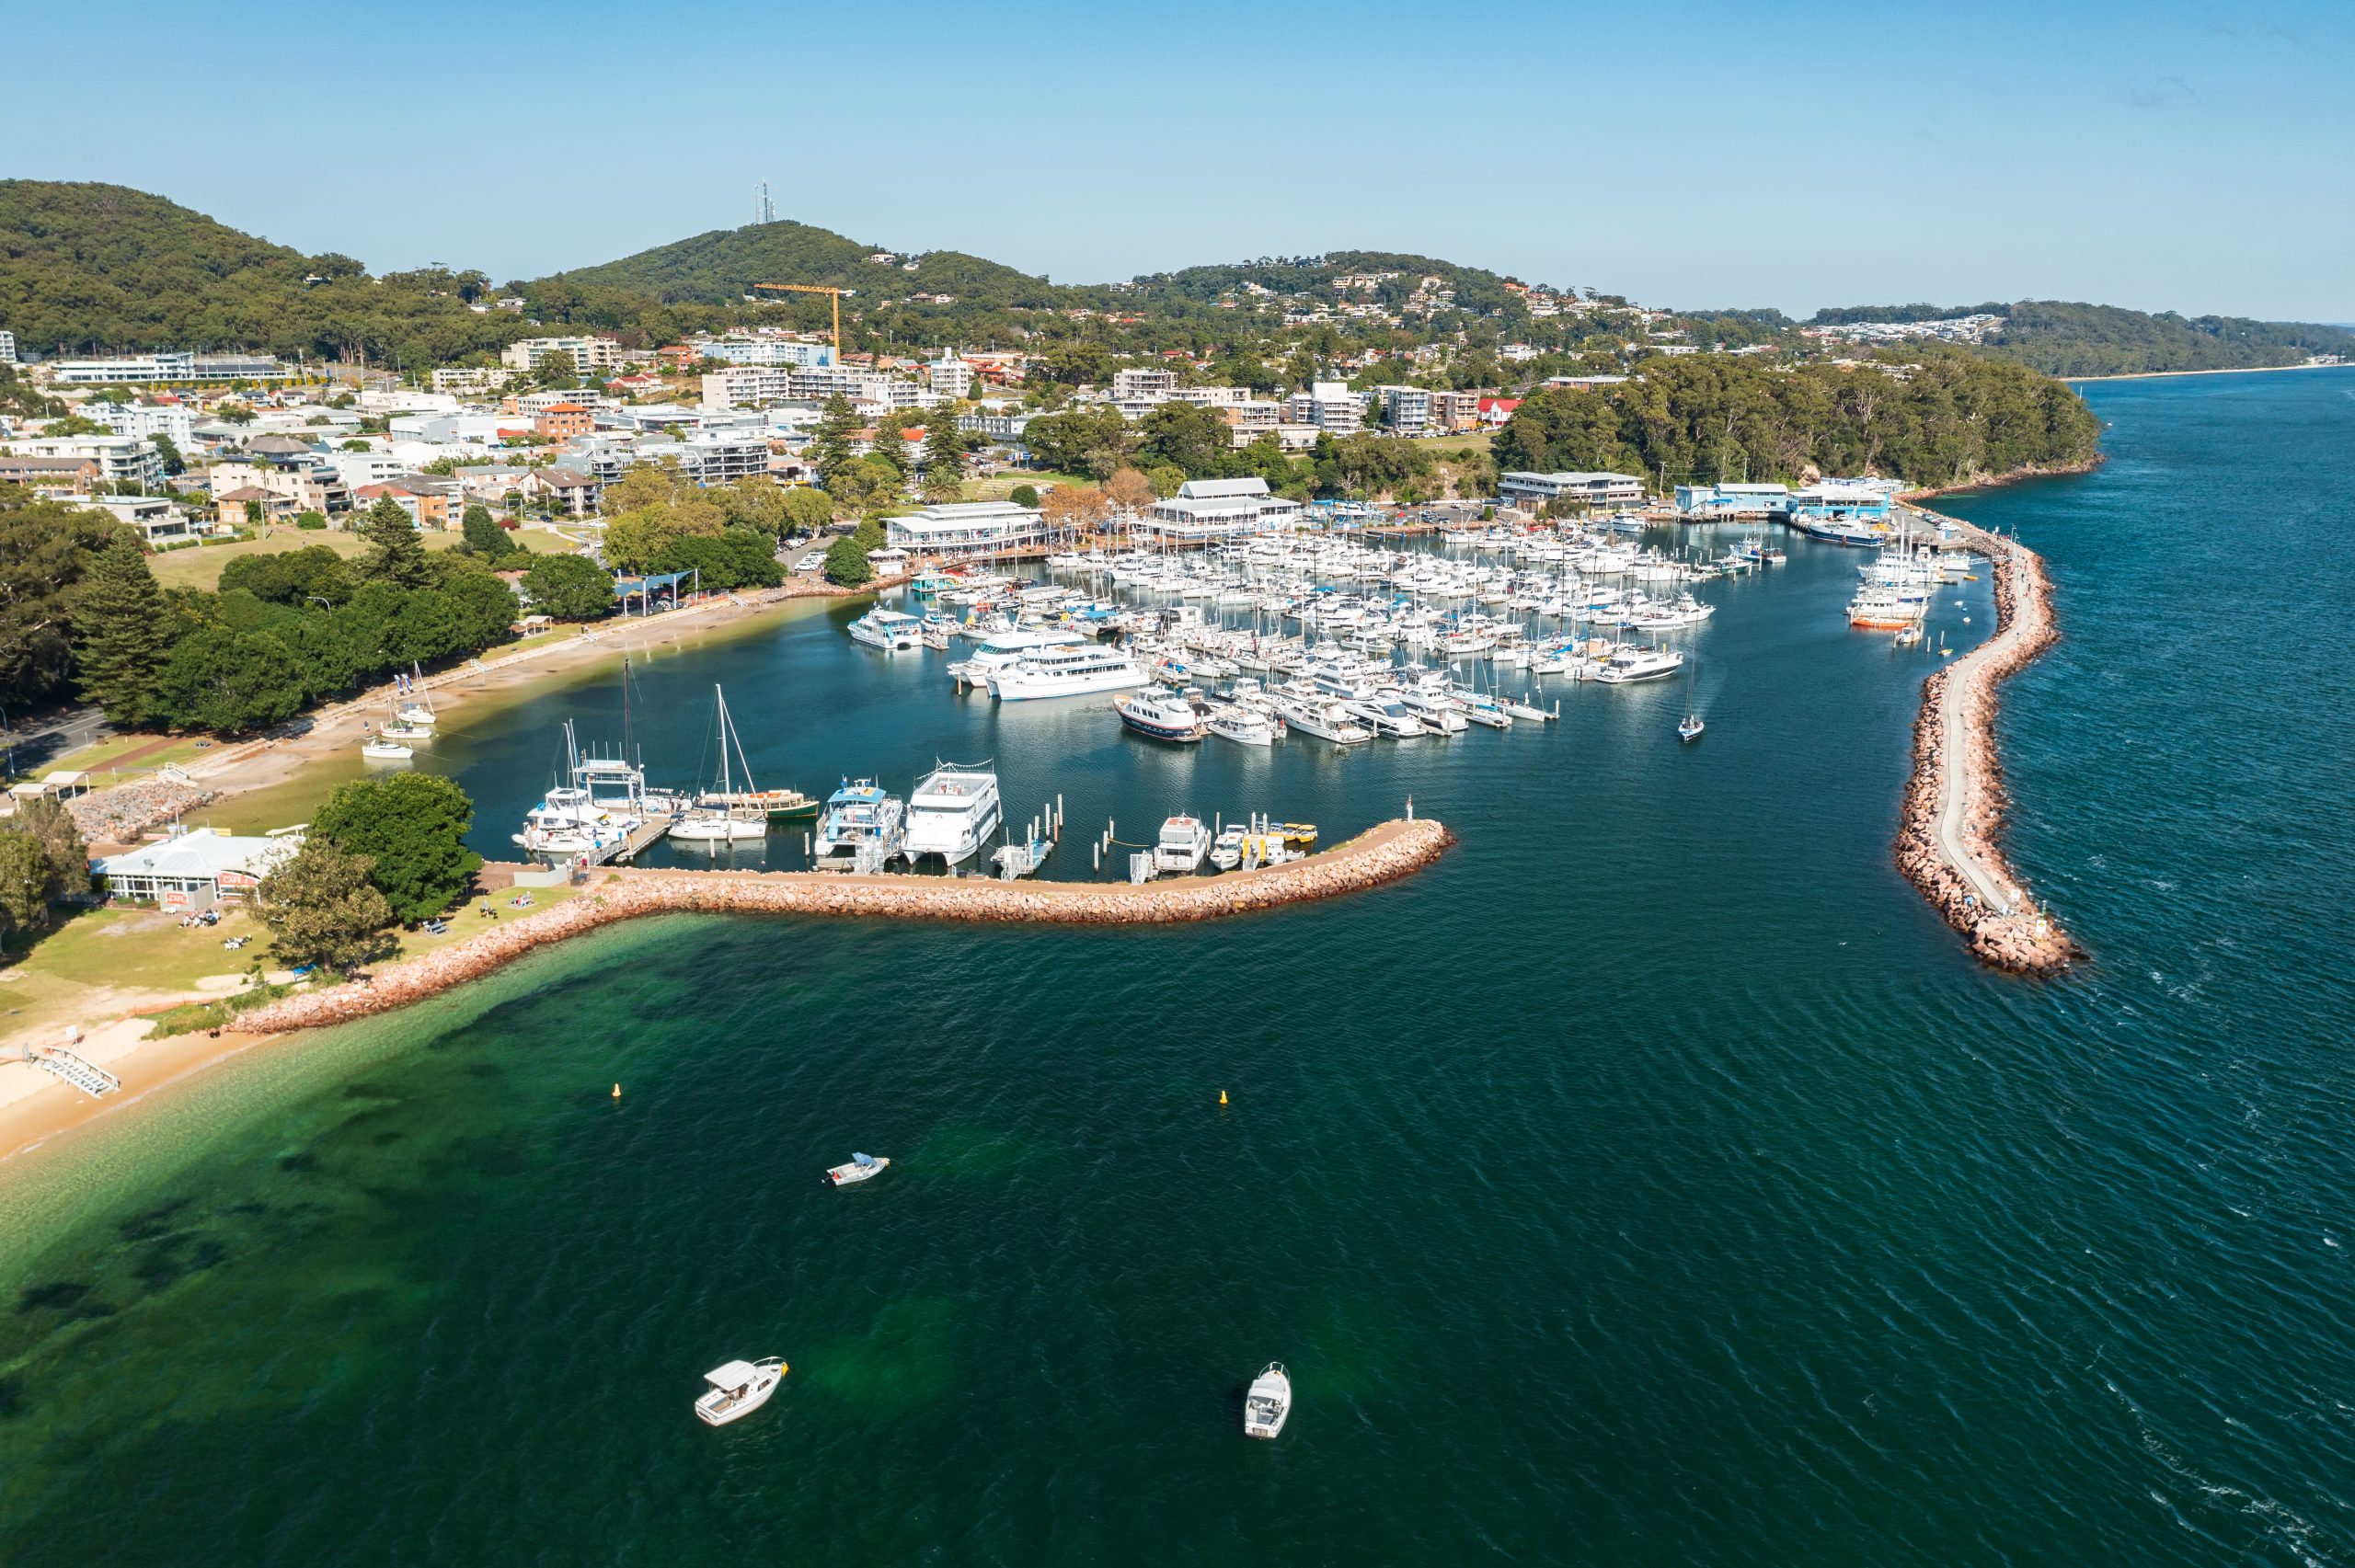 Aerial view of Nelson Bay marina, breakwater, and town, with aqua waters of Port Stephens, Australia.